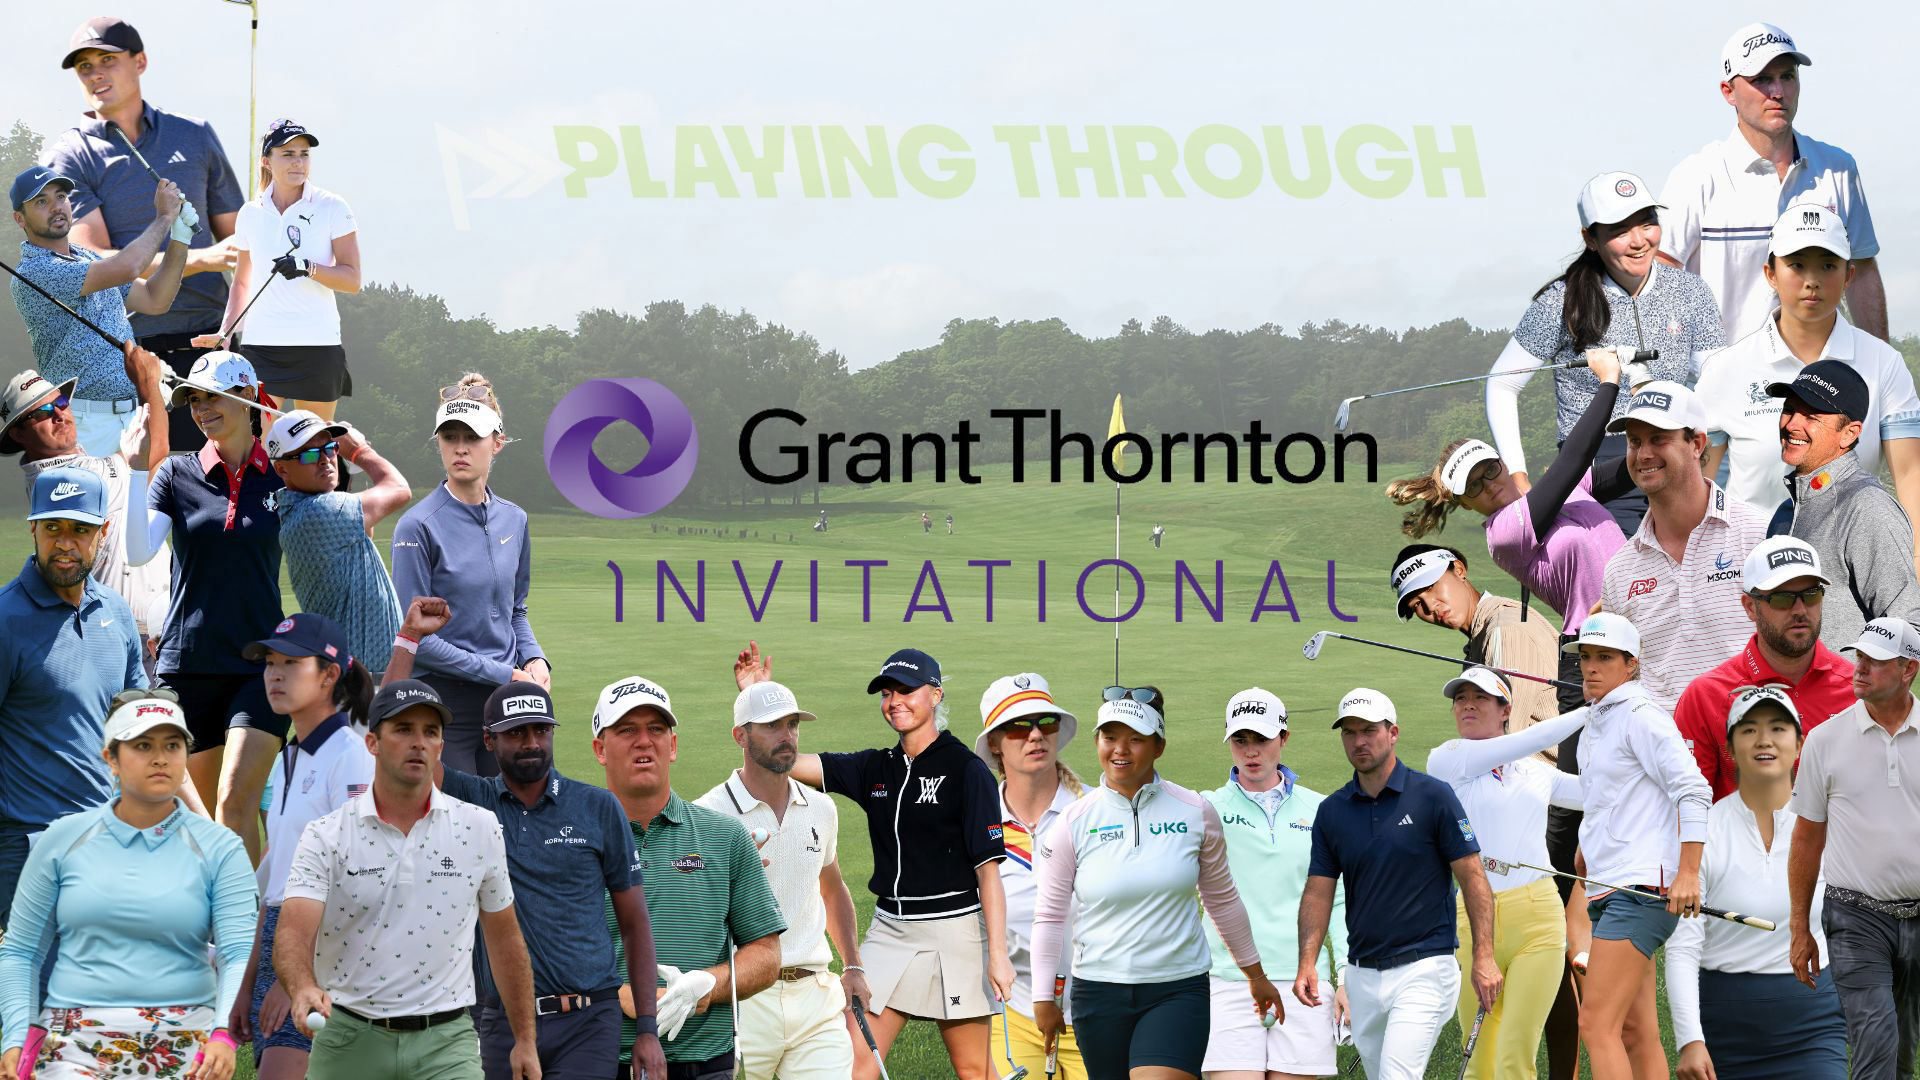 Grant Thornton Invitational How to watch, TV schedule, streaming